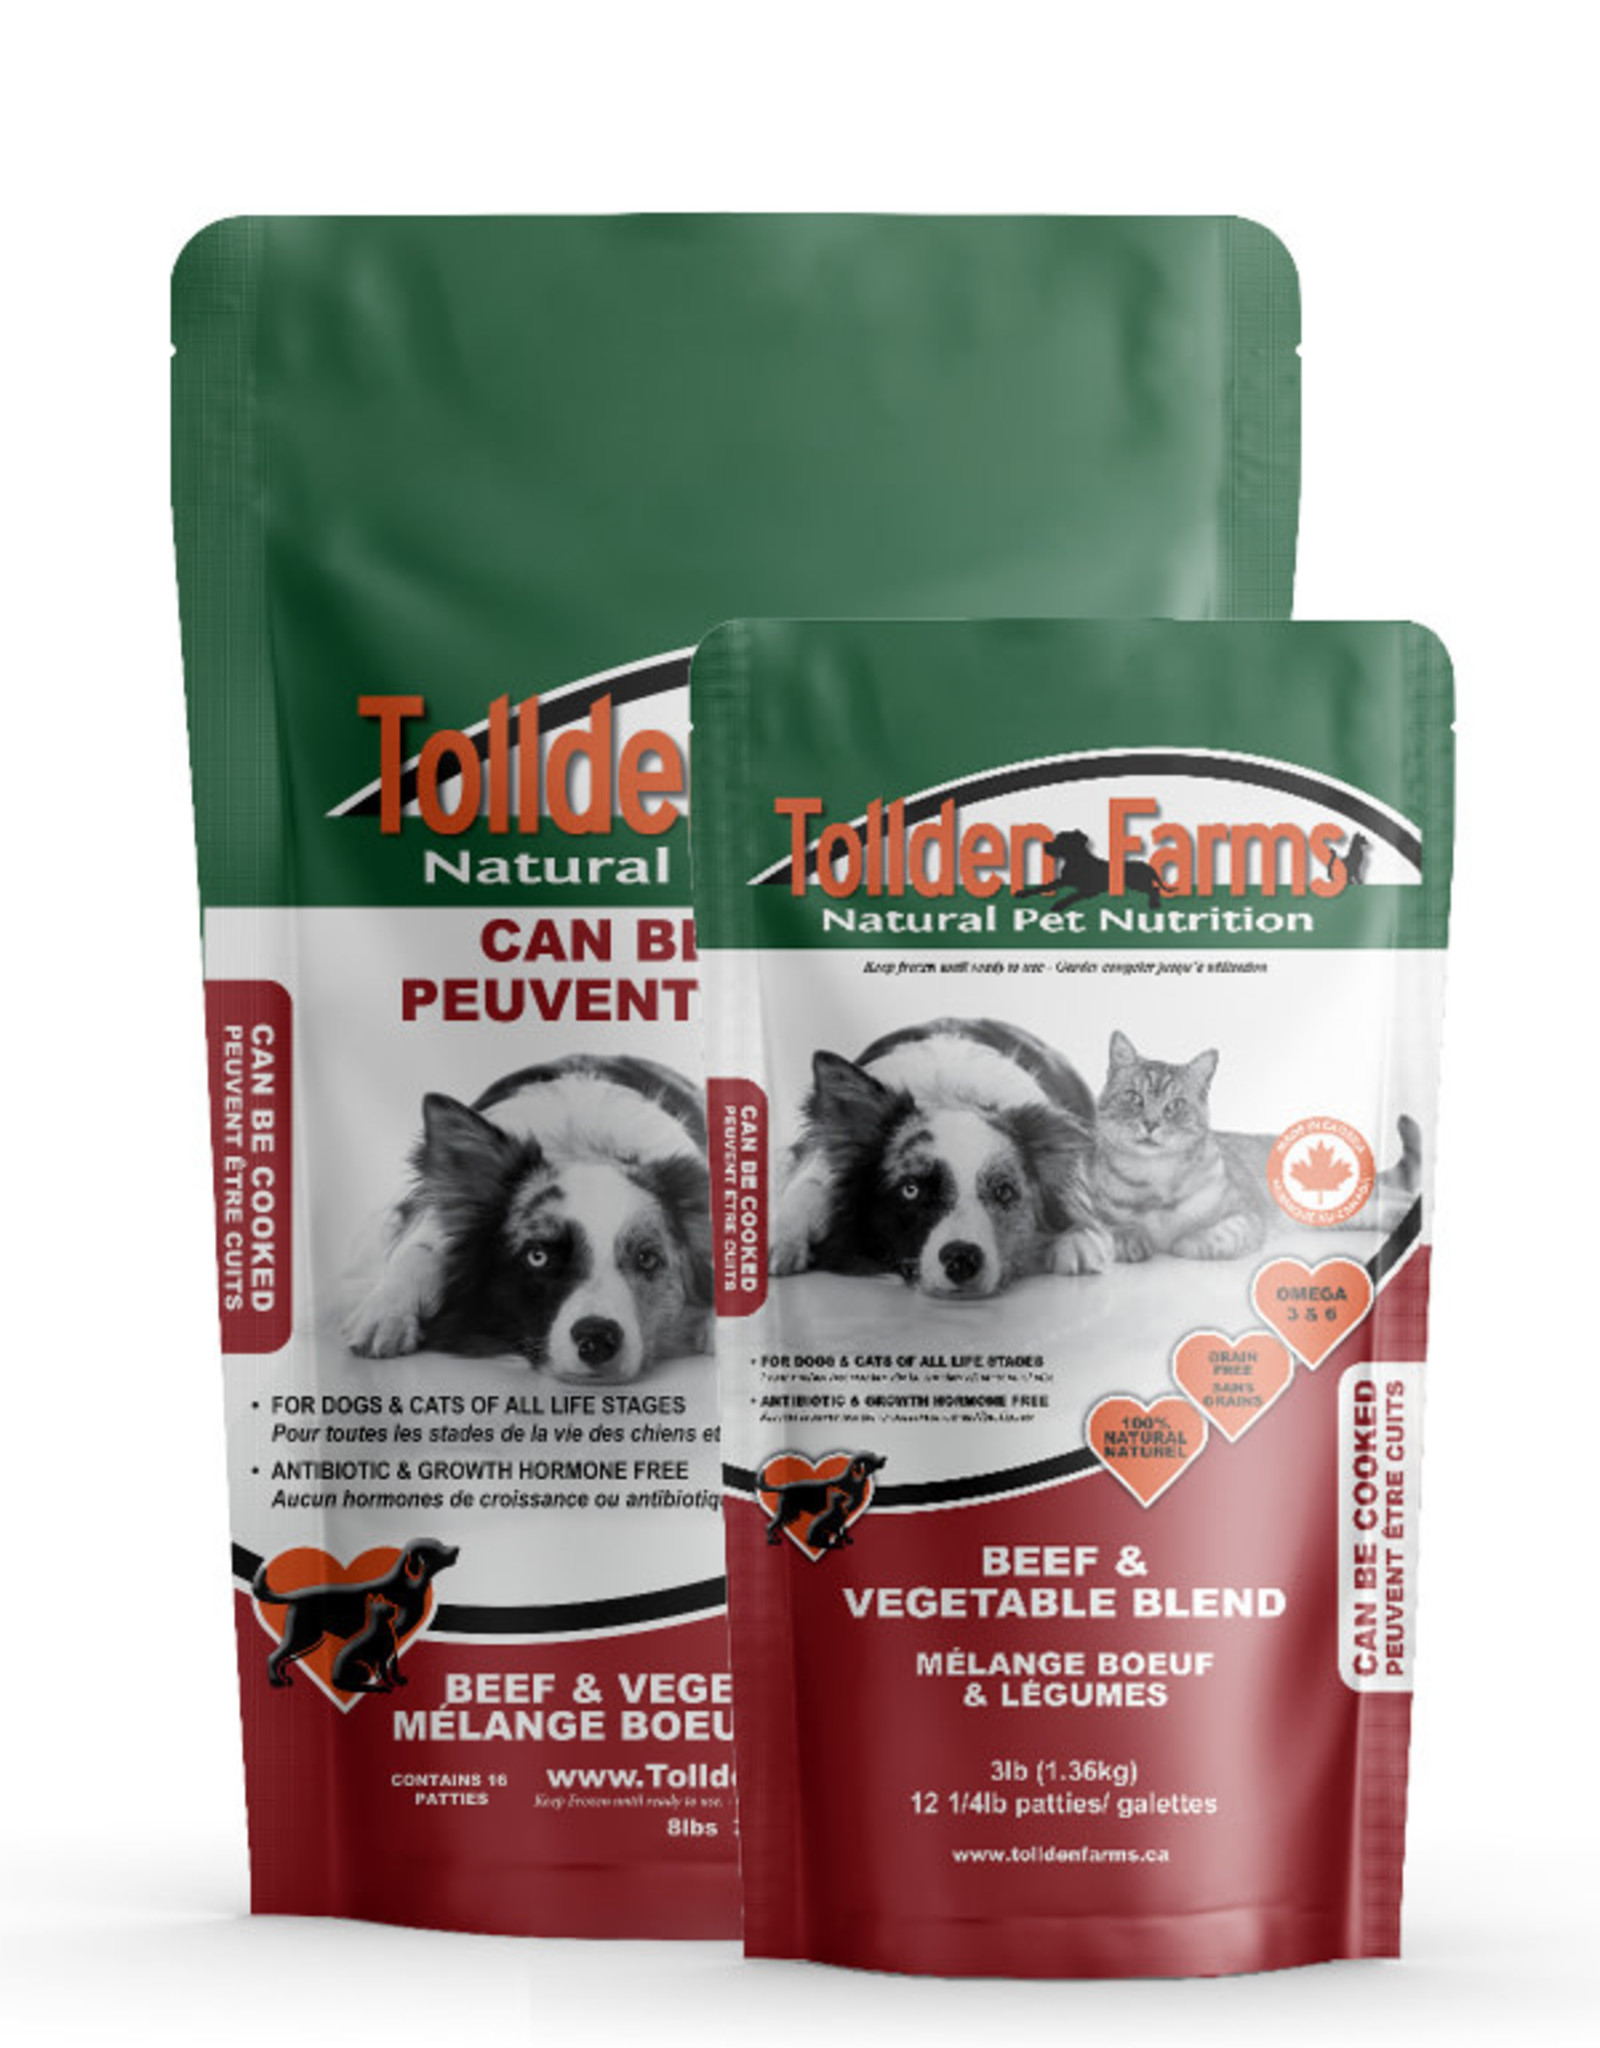 Tollden Tollden Farms Beef & Vegetable Raw Dog Food Blend